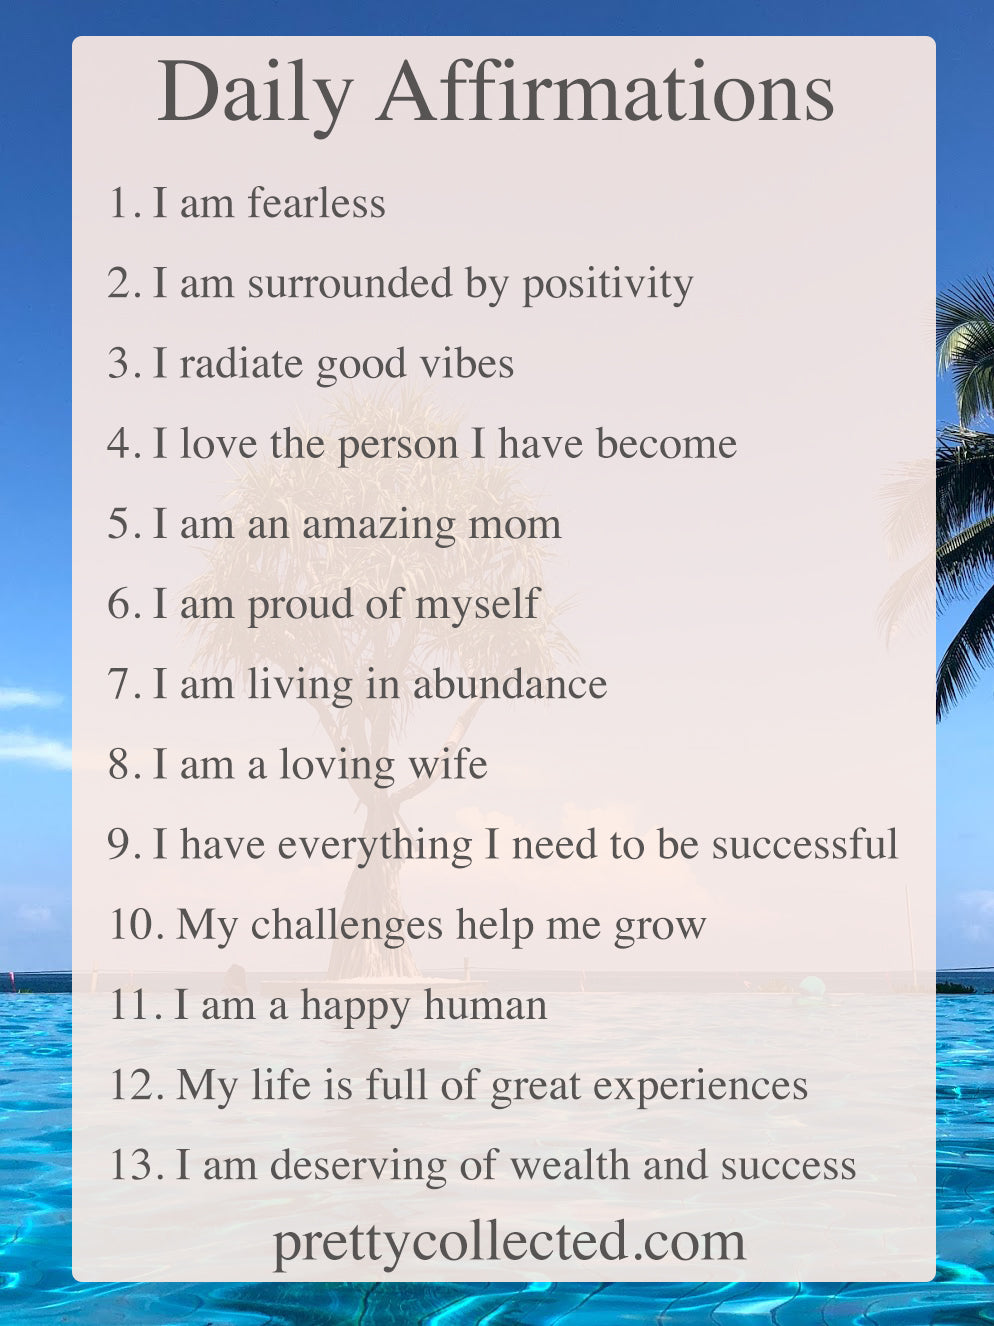 Daily Affirmations - How to Create Positive Affirmations - Pretty Collected